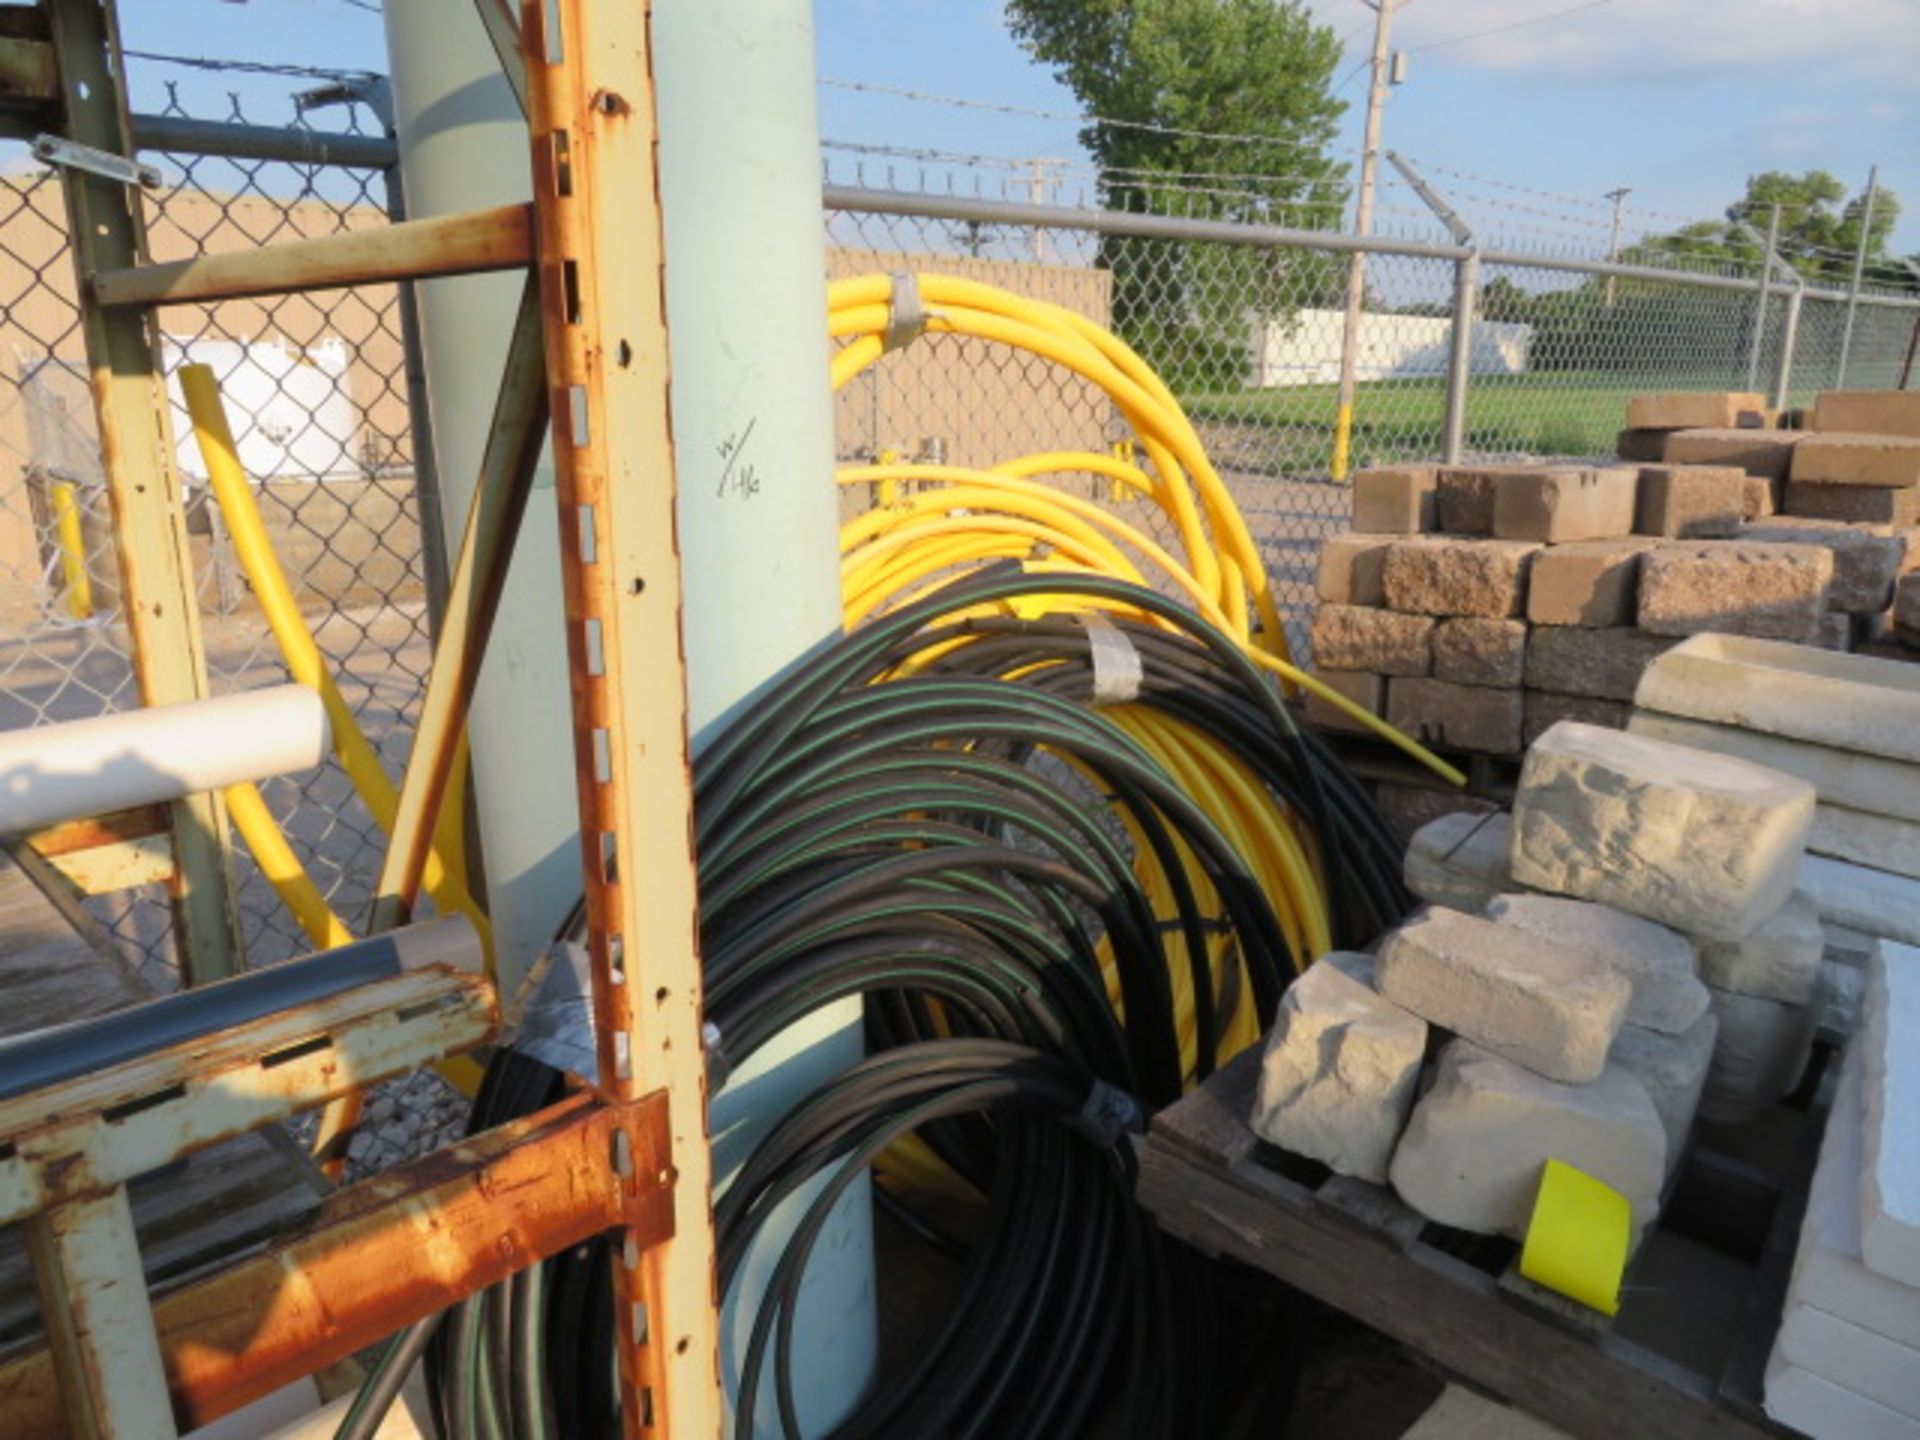 LOT CONSISTING OF: 3-tier rack loaded with various size & length tube & pipe, large pipe, gas tubing - Image 4 of 6